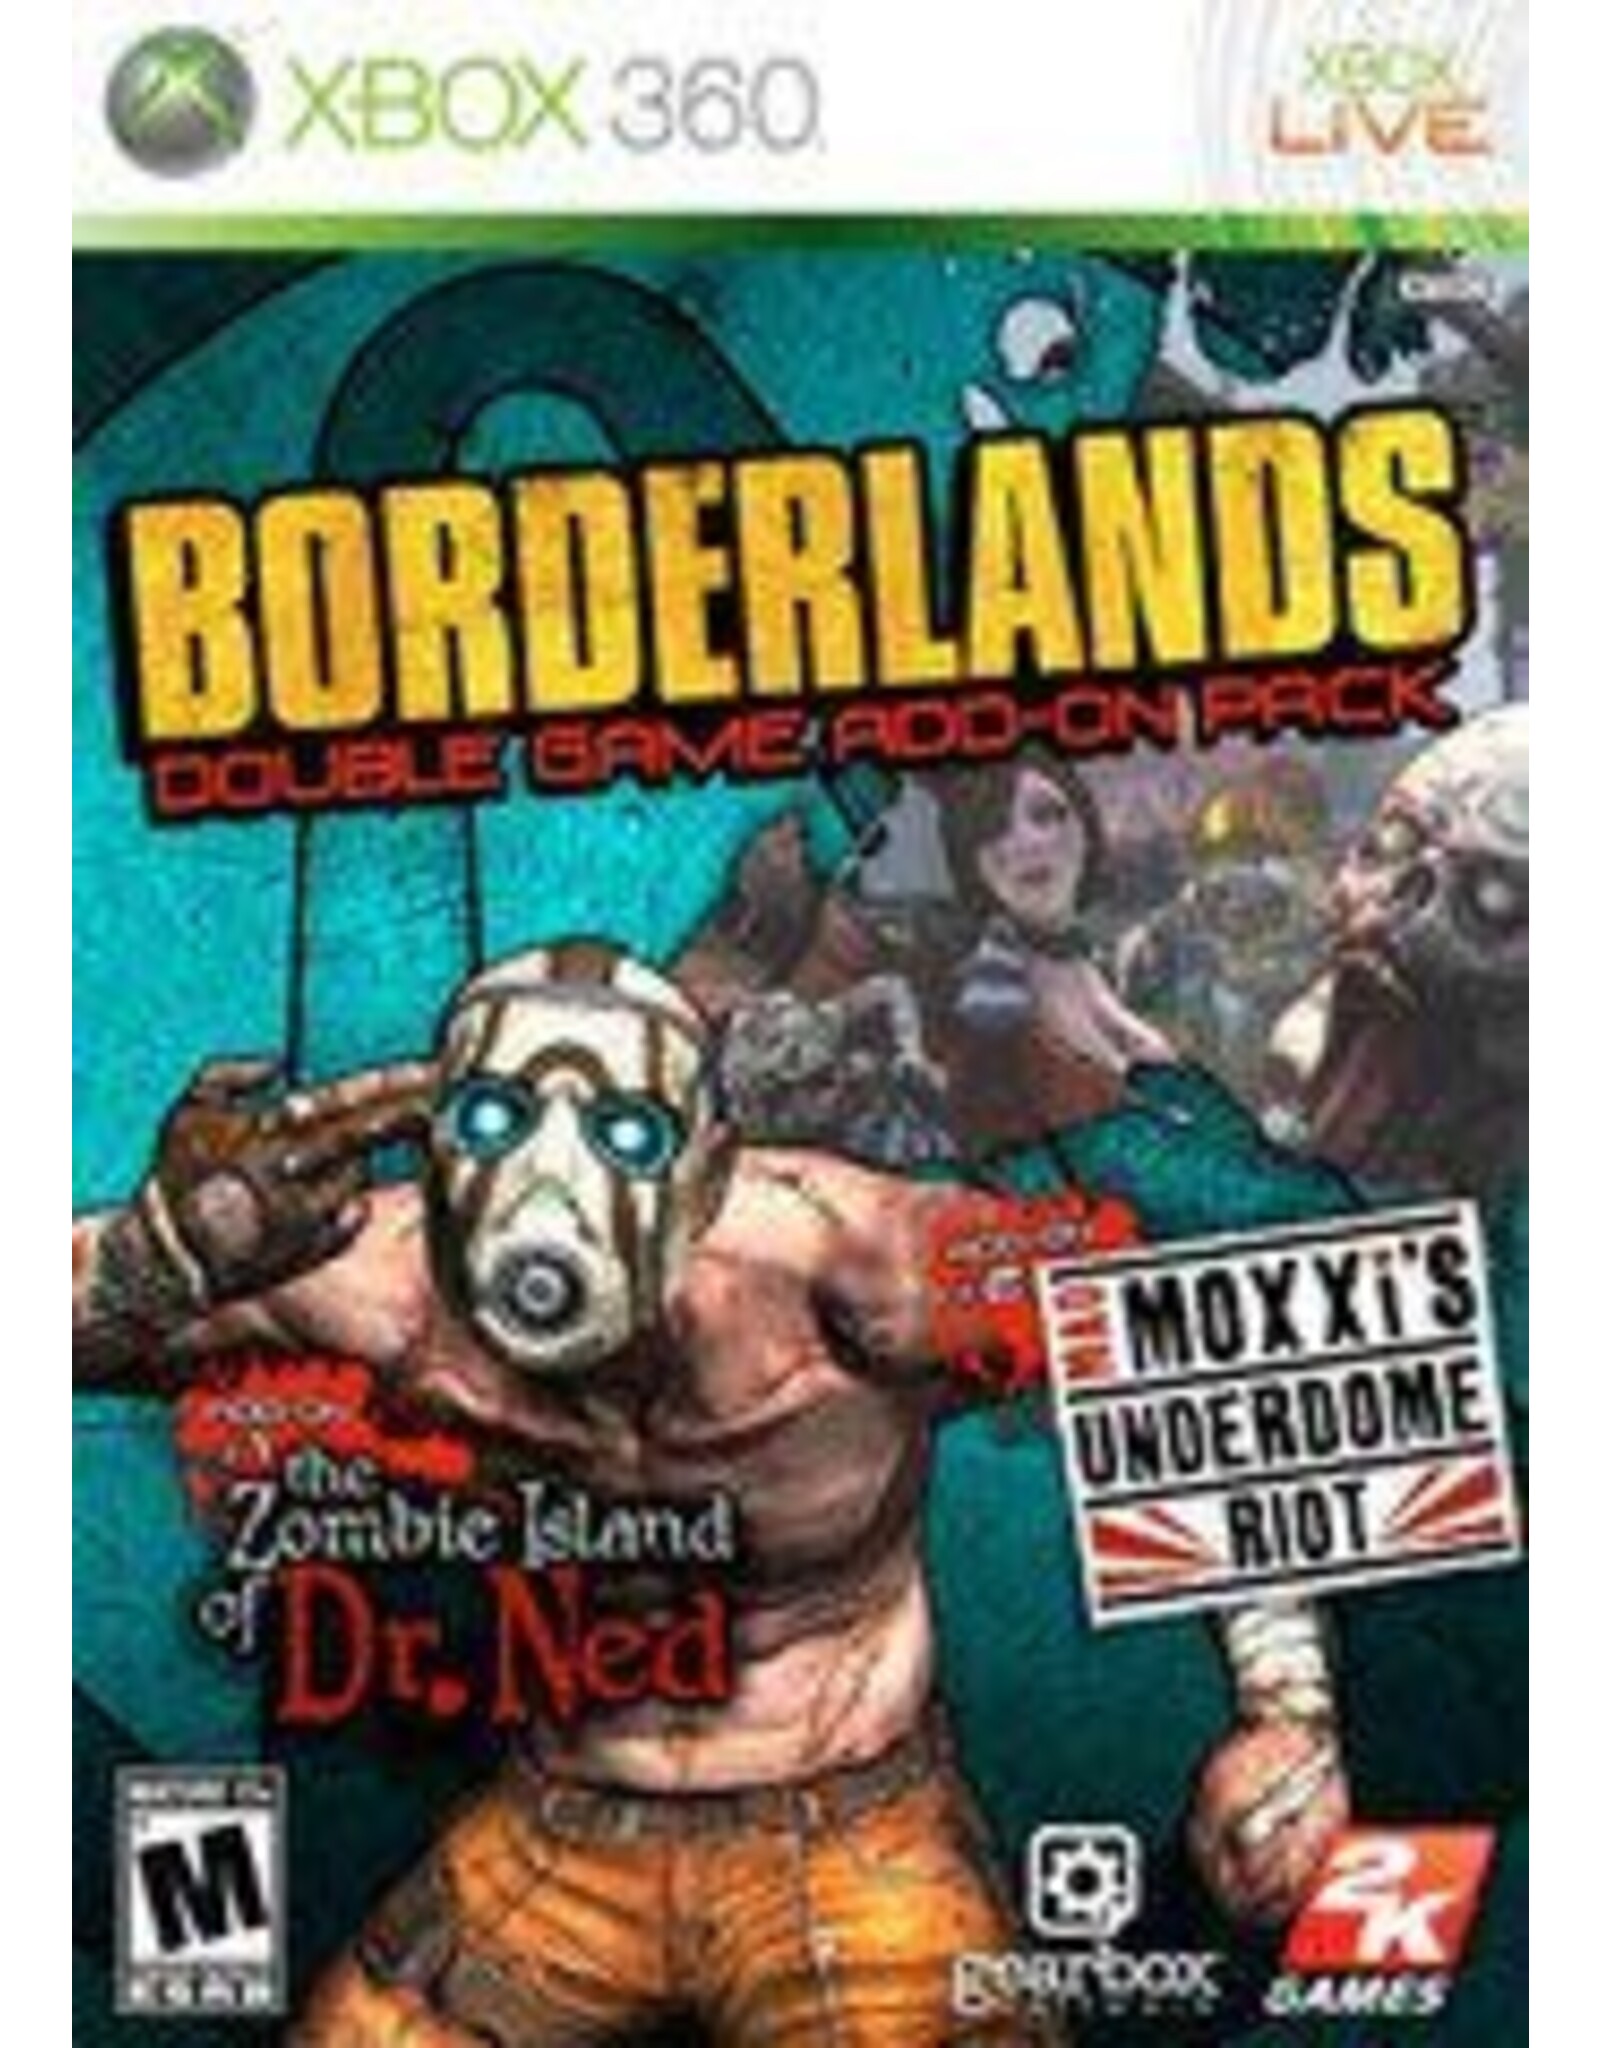 Xbox 360 Borderlands: Double Game Add-On Pack (CiB) **Borderlands Game Required**